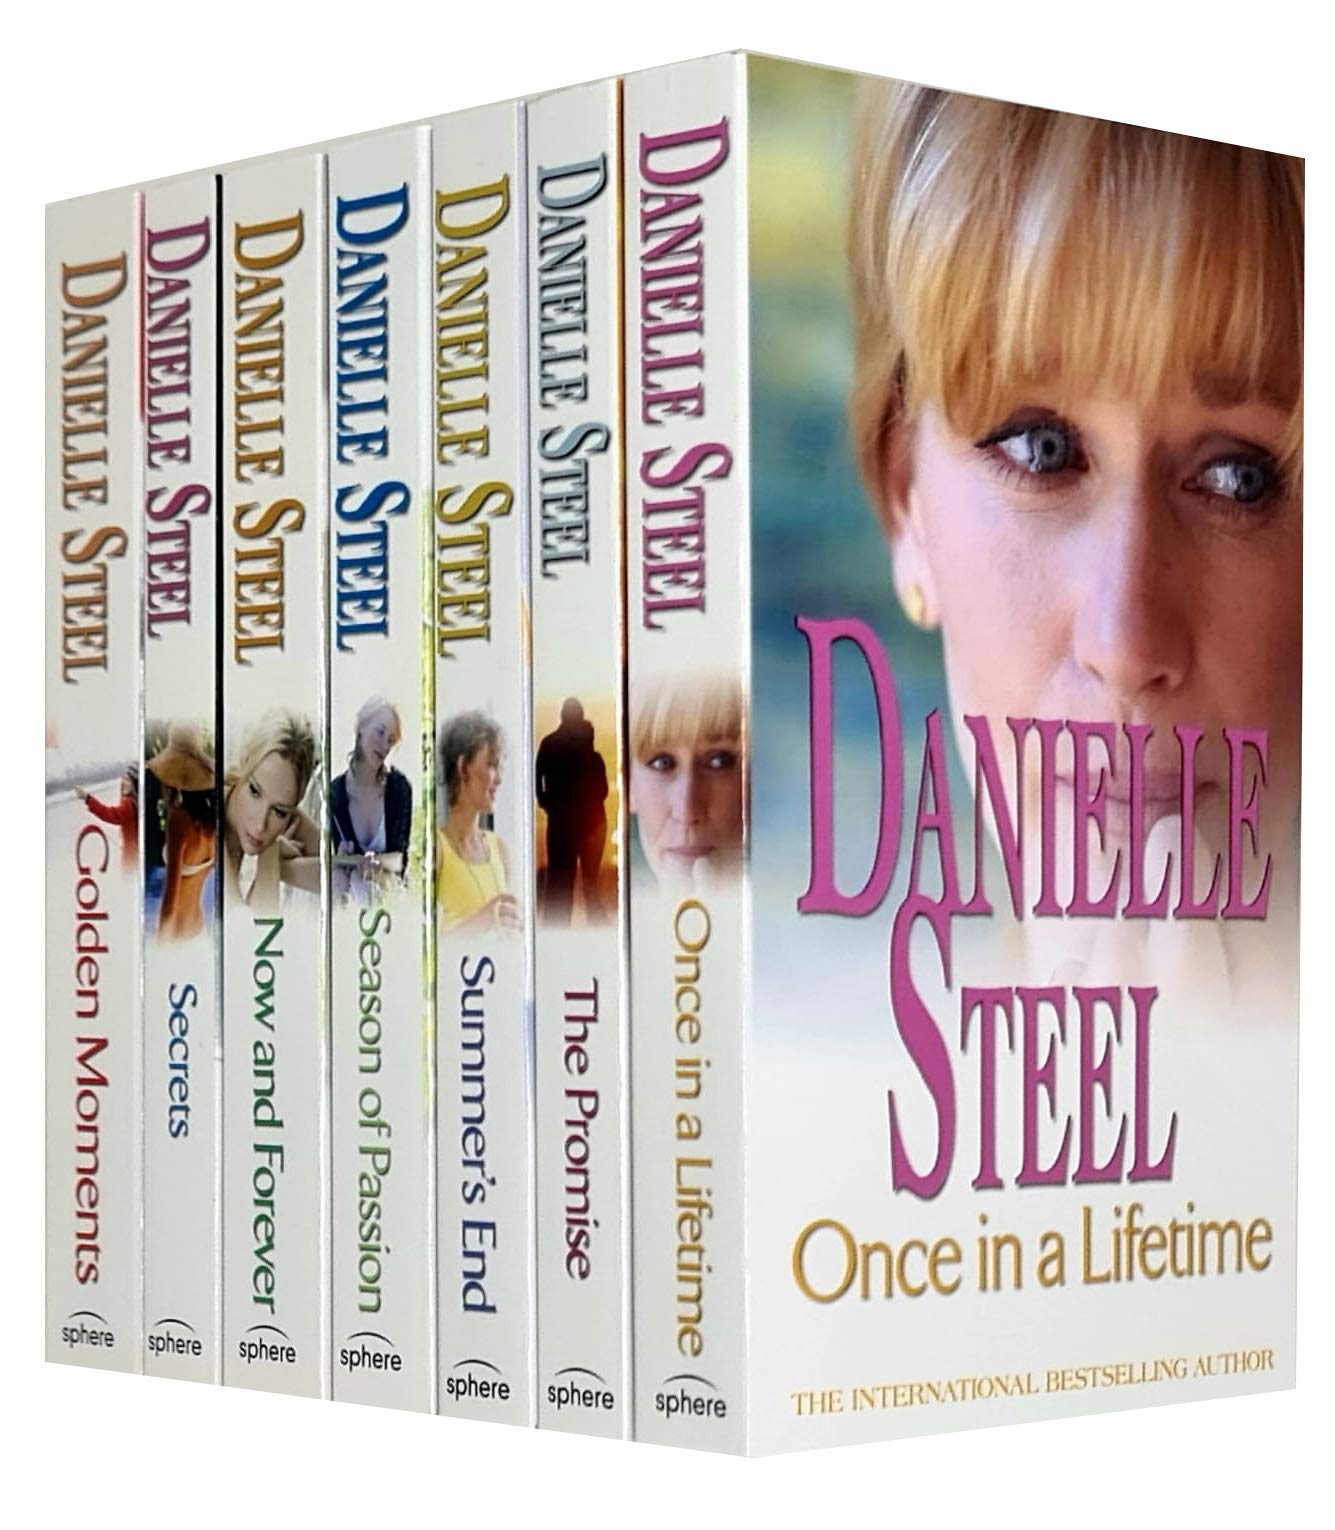 Danielle Steel Collection 7 Books Set (Once In A Lifetime, The Promise, Secrets) Paperback - Lets Buy Books